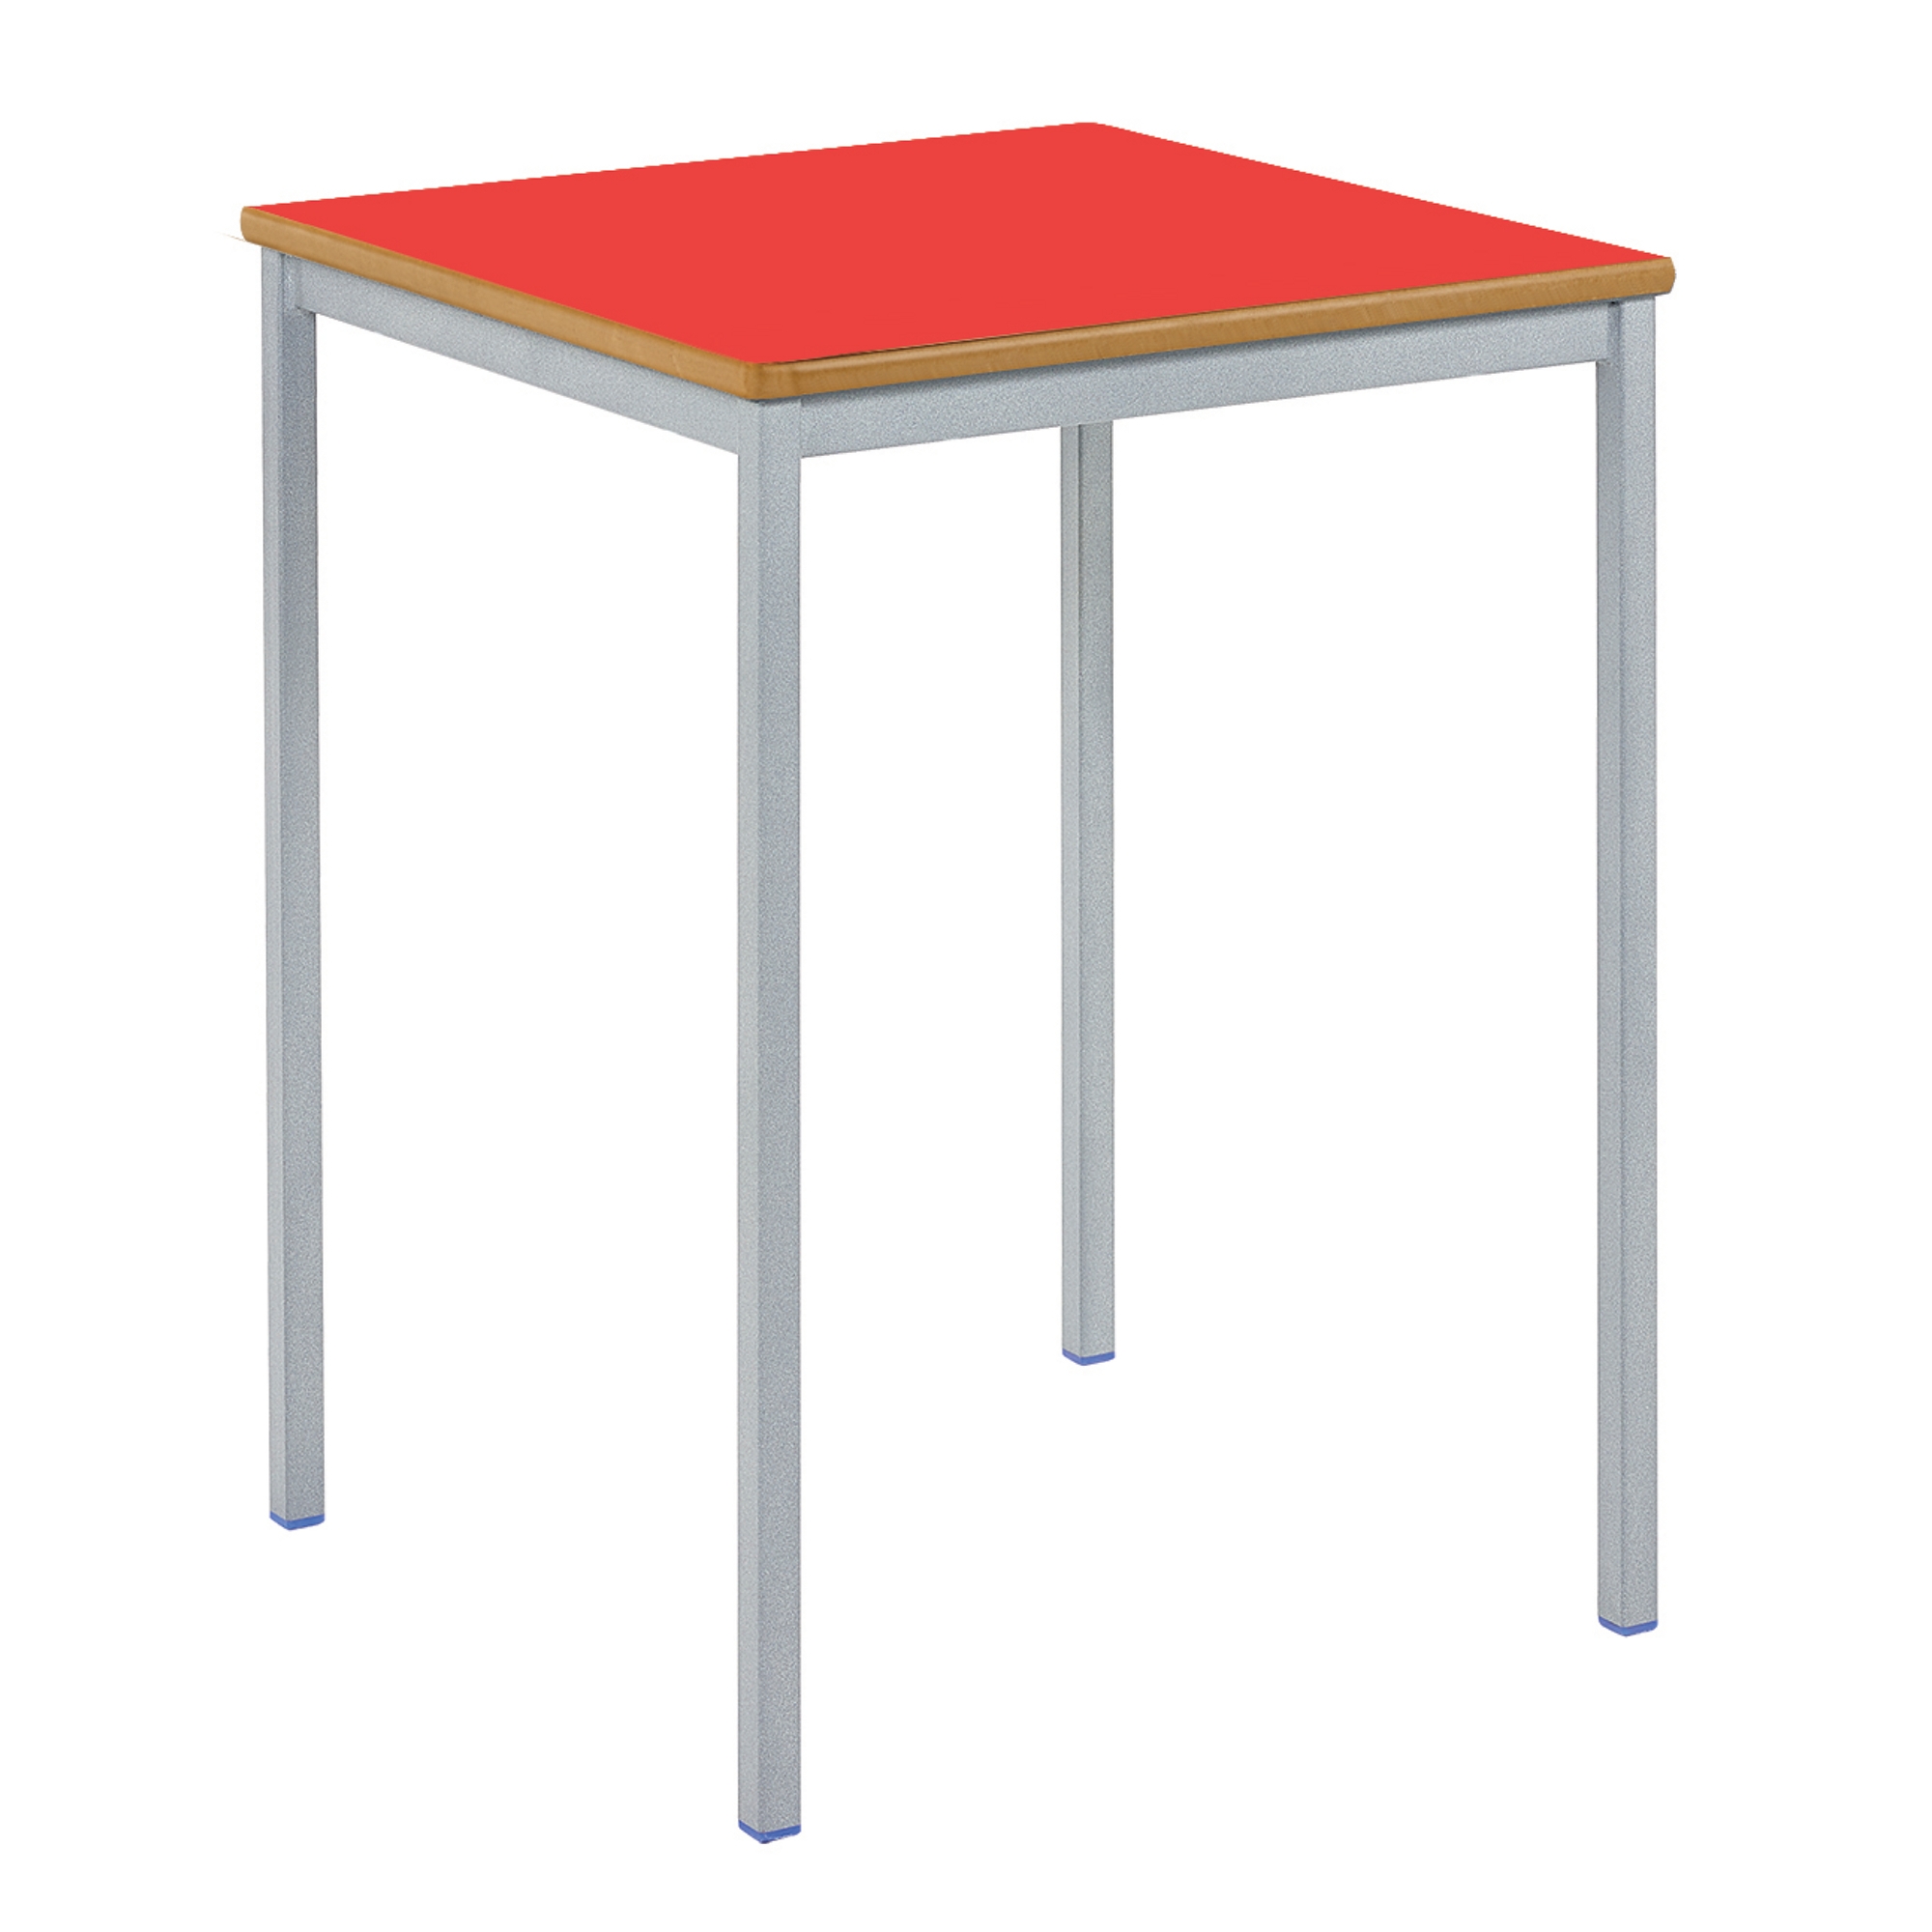 Classmates Square Fully Welded Classroom Table - 600 x 600 x 640mm - Red